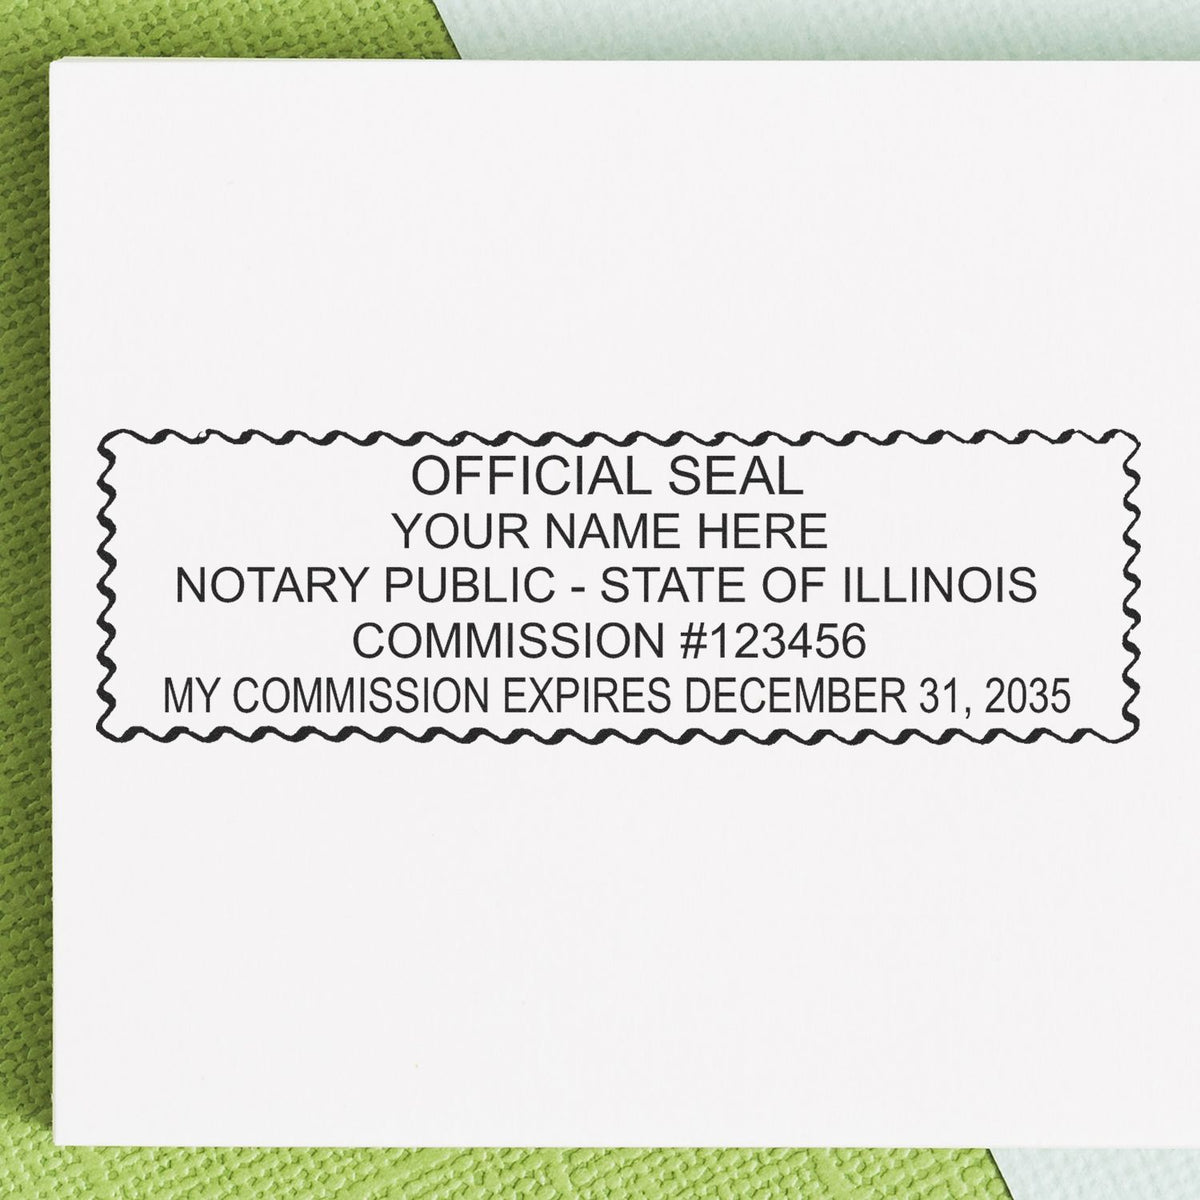 A lifestyle photo showing a stamped image of the Wooden Handle Illinois Rectangular Notary Public Stamp on a piece of paper